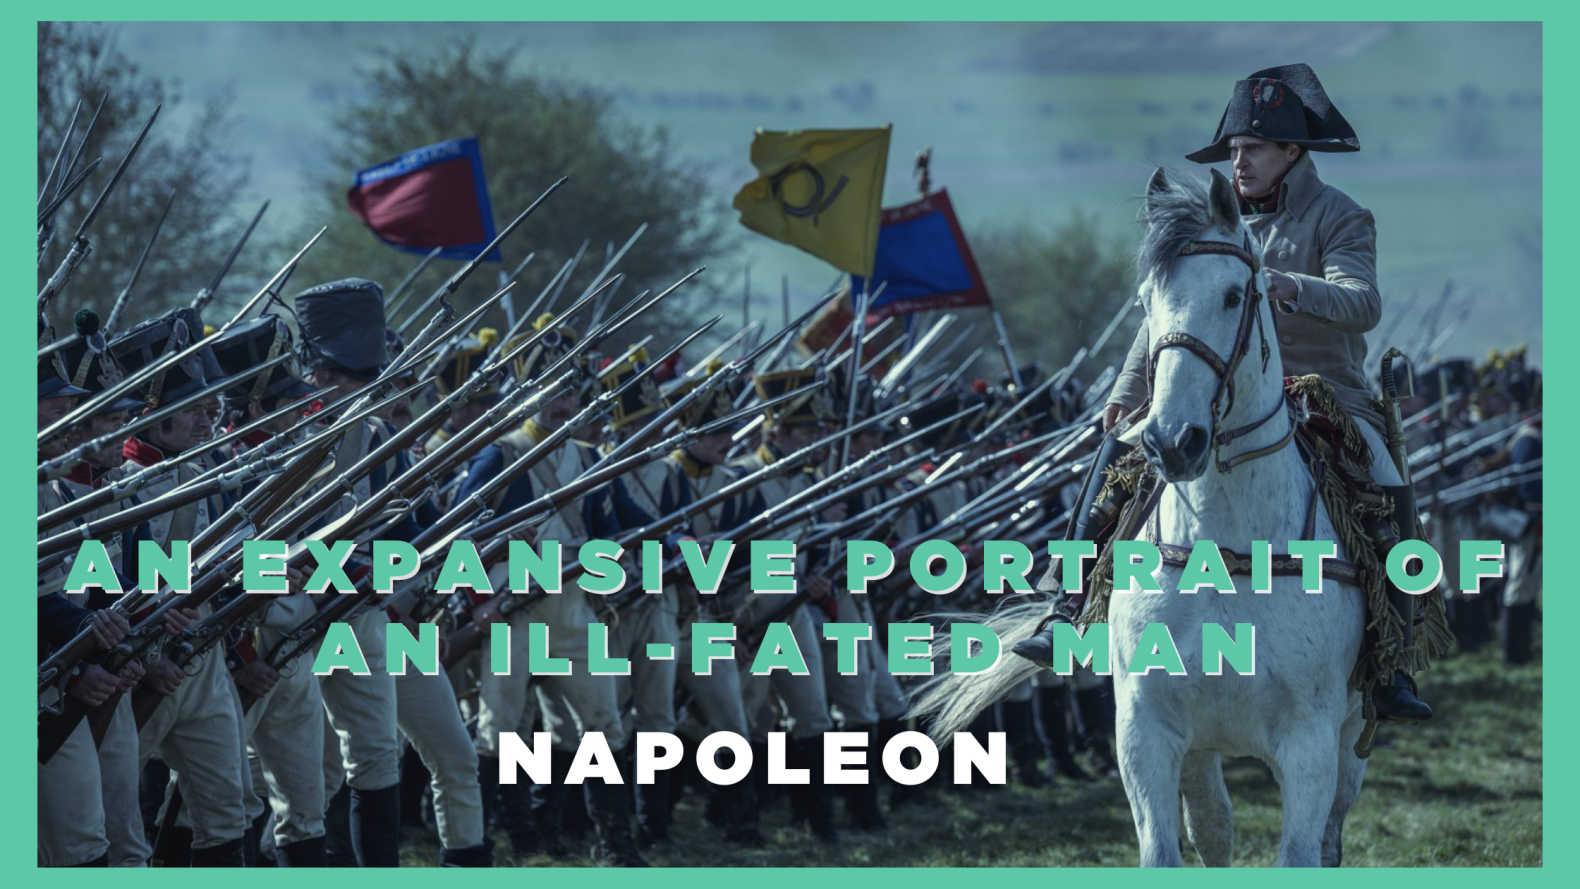 Napoleon - An Expansive Portrait of an Ill-Fated Man